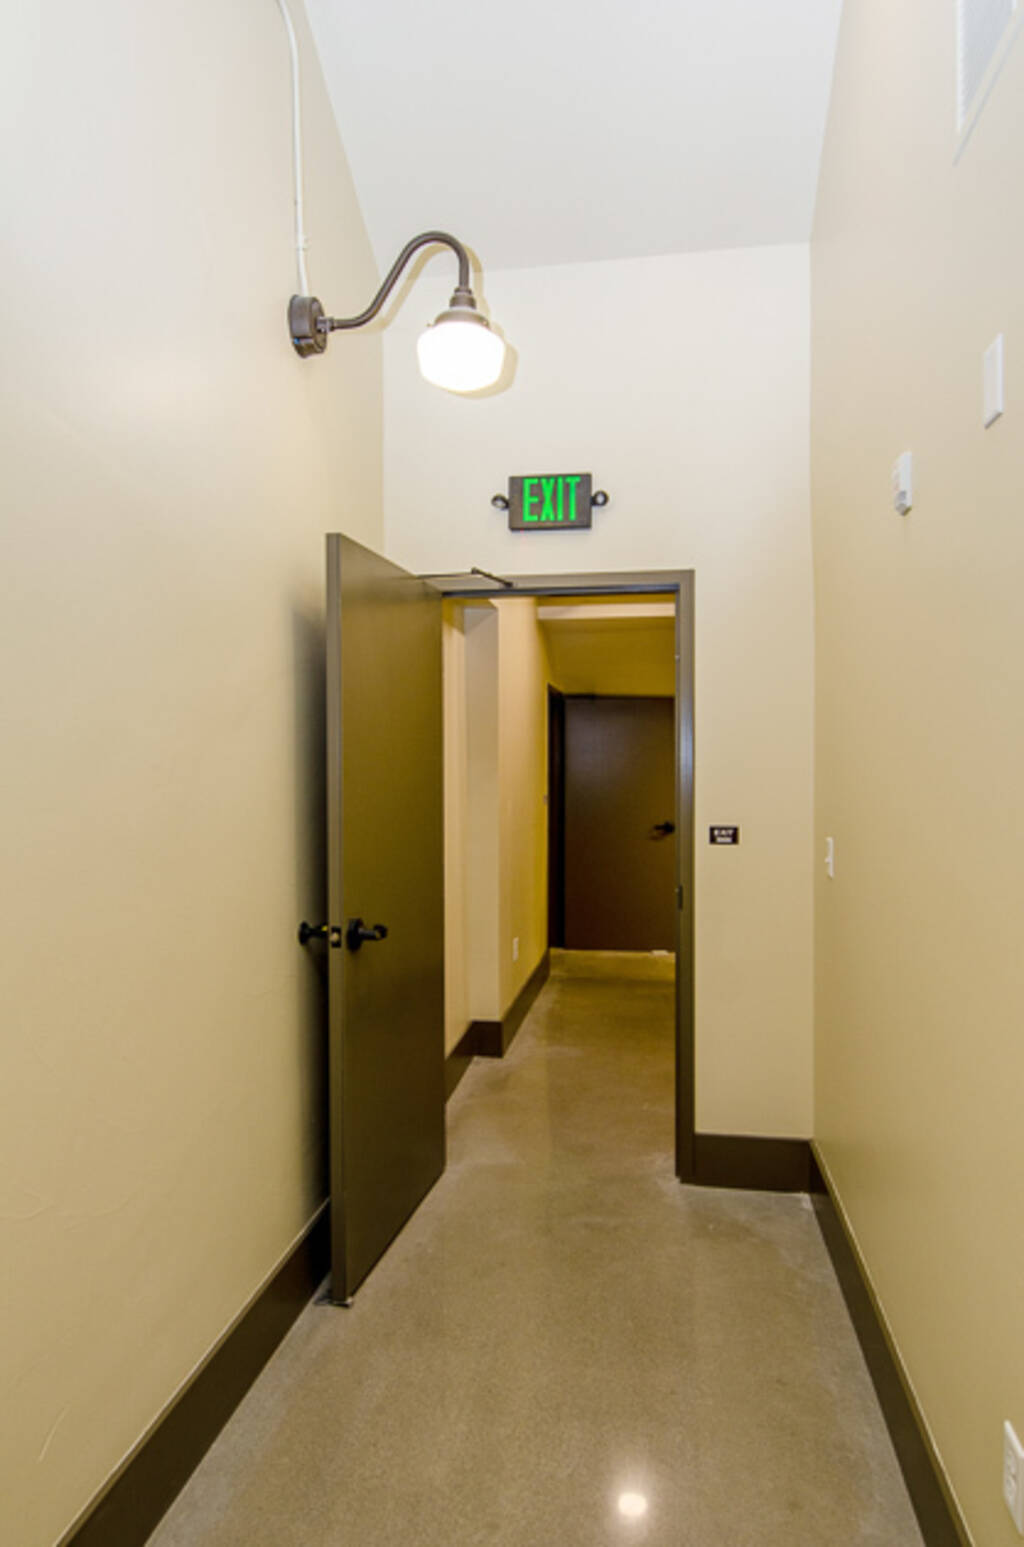 Suite A Green exit sign and exit door open 